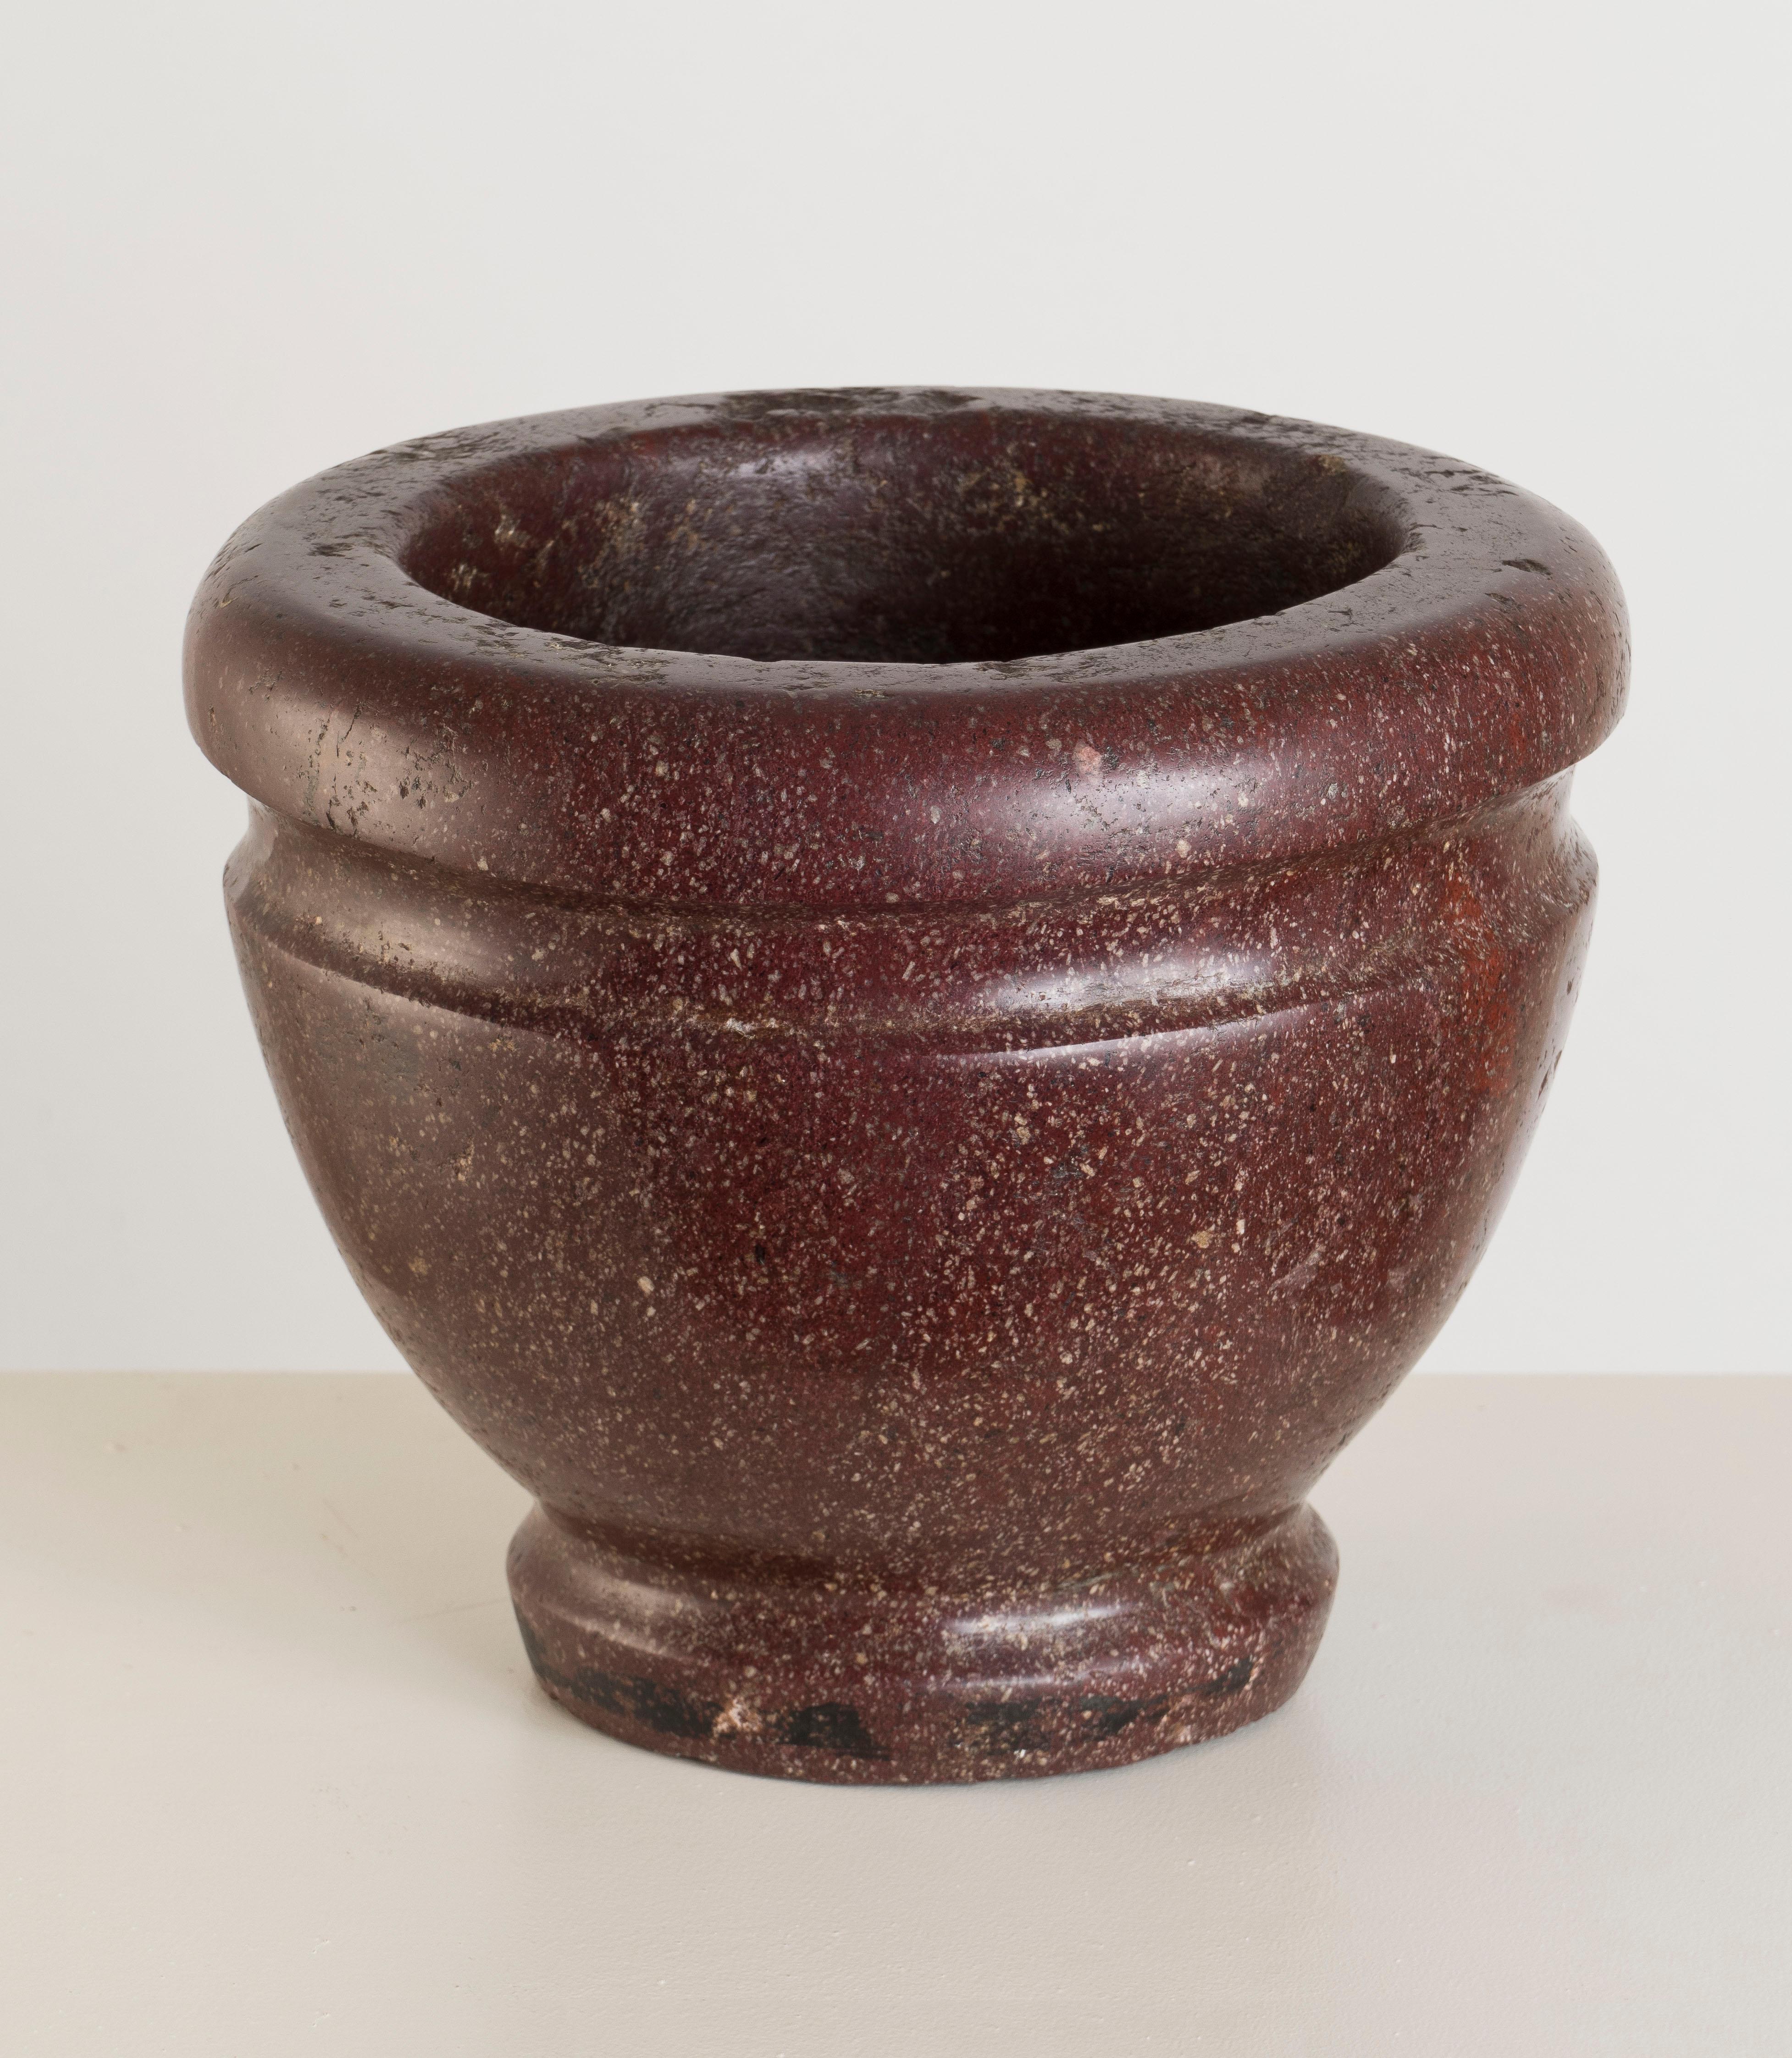 ANTIQUE ITALIAN PORPRHYRY MORTAR
Rome, 16th/17th Century
Porphyry
19 x 23 x 23 cm
7 1/2 x 9 1/4 x 9 1/4 in

Provenance:
Sotheby Parke Bernet Florence, 21 October 1976, page 36, lot 56, ill.